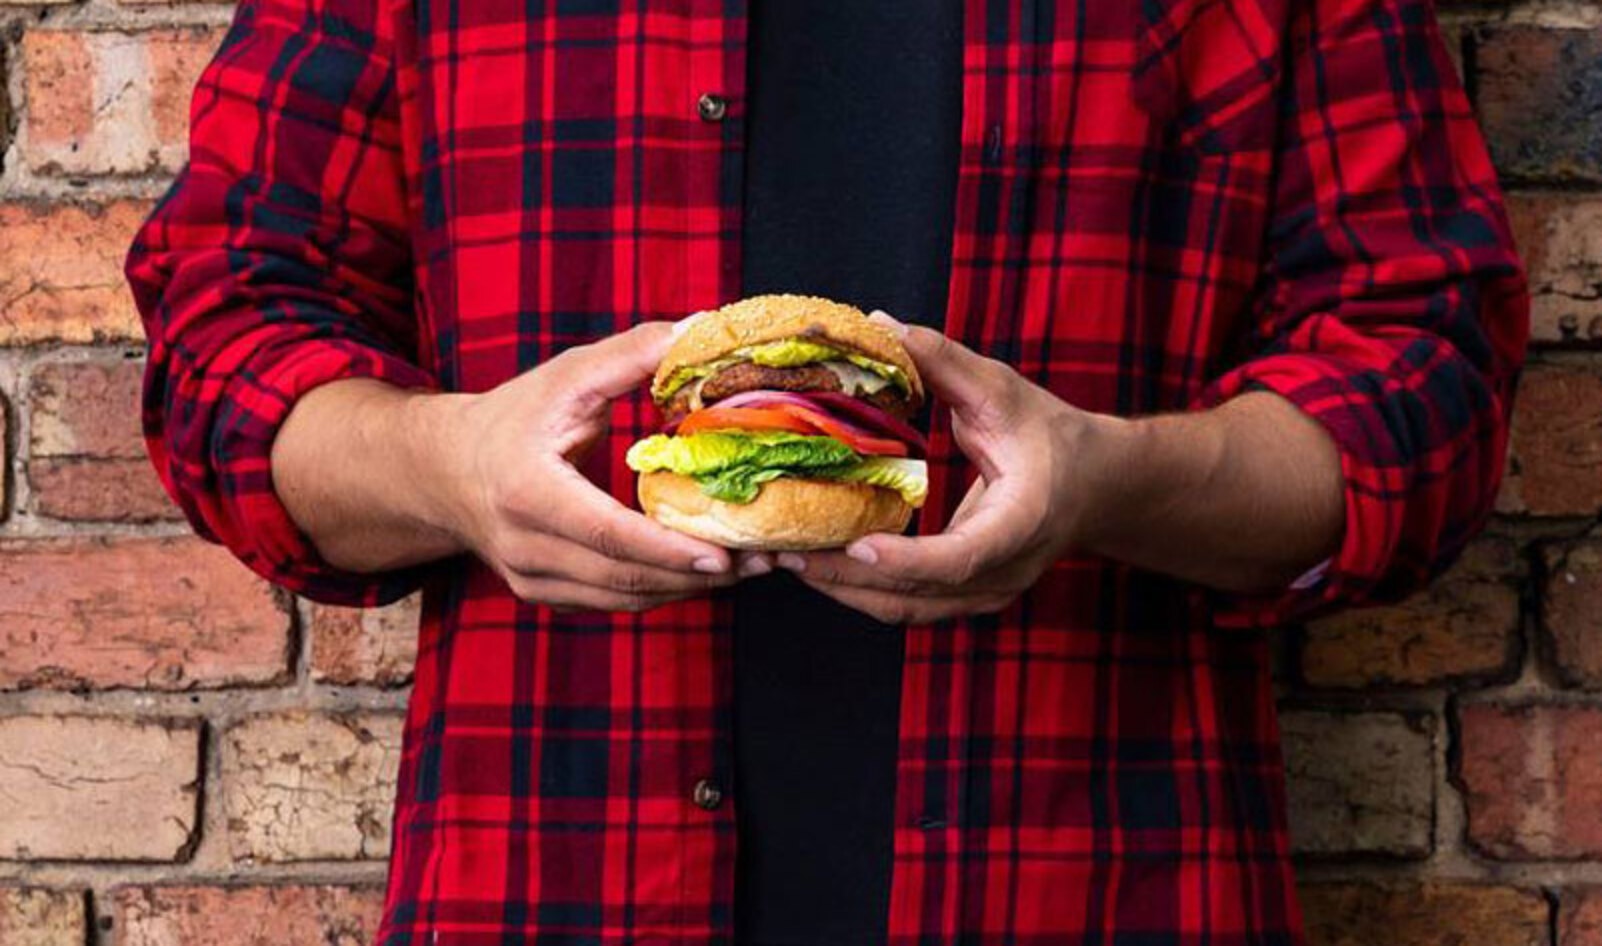 Australian Burger Chain Grill’d Drops All Meat From Menu for 24 Hours&nbsp;